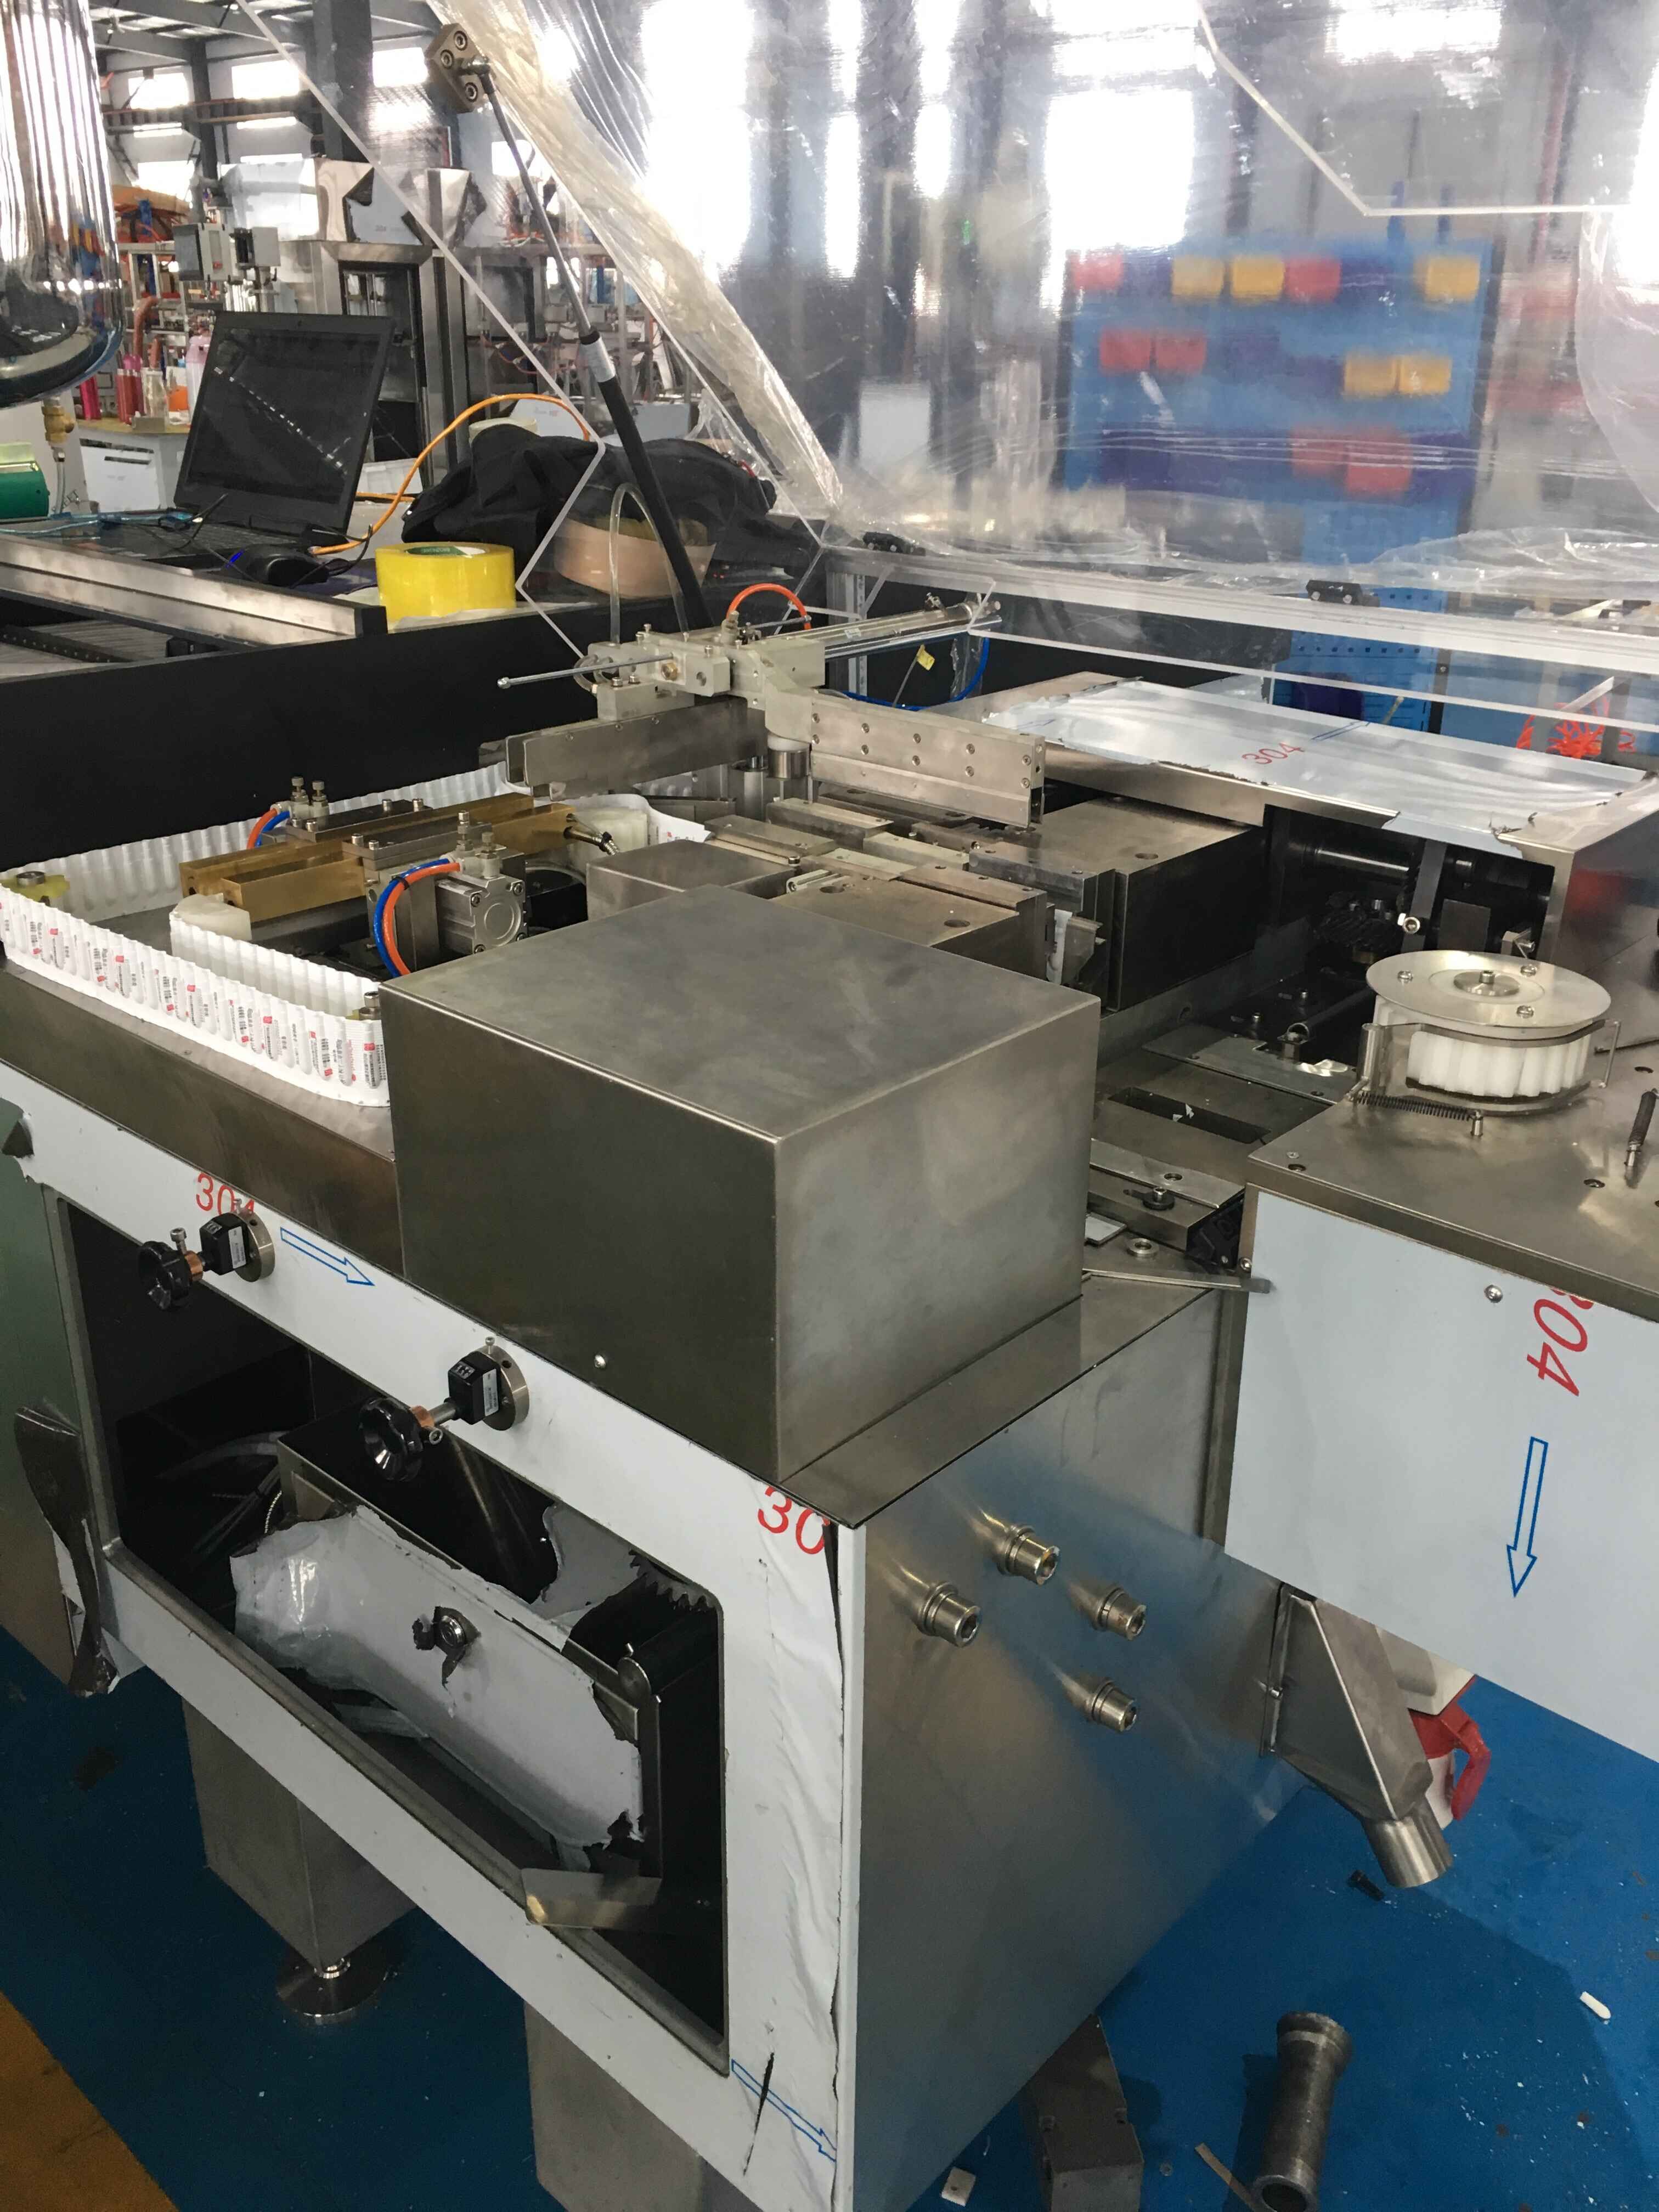 New Model High Speed Suppository Forming Filling Sealing Counting Machine 